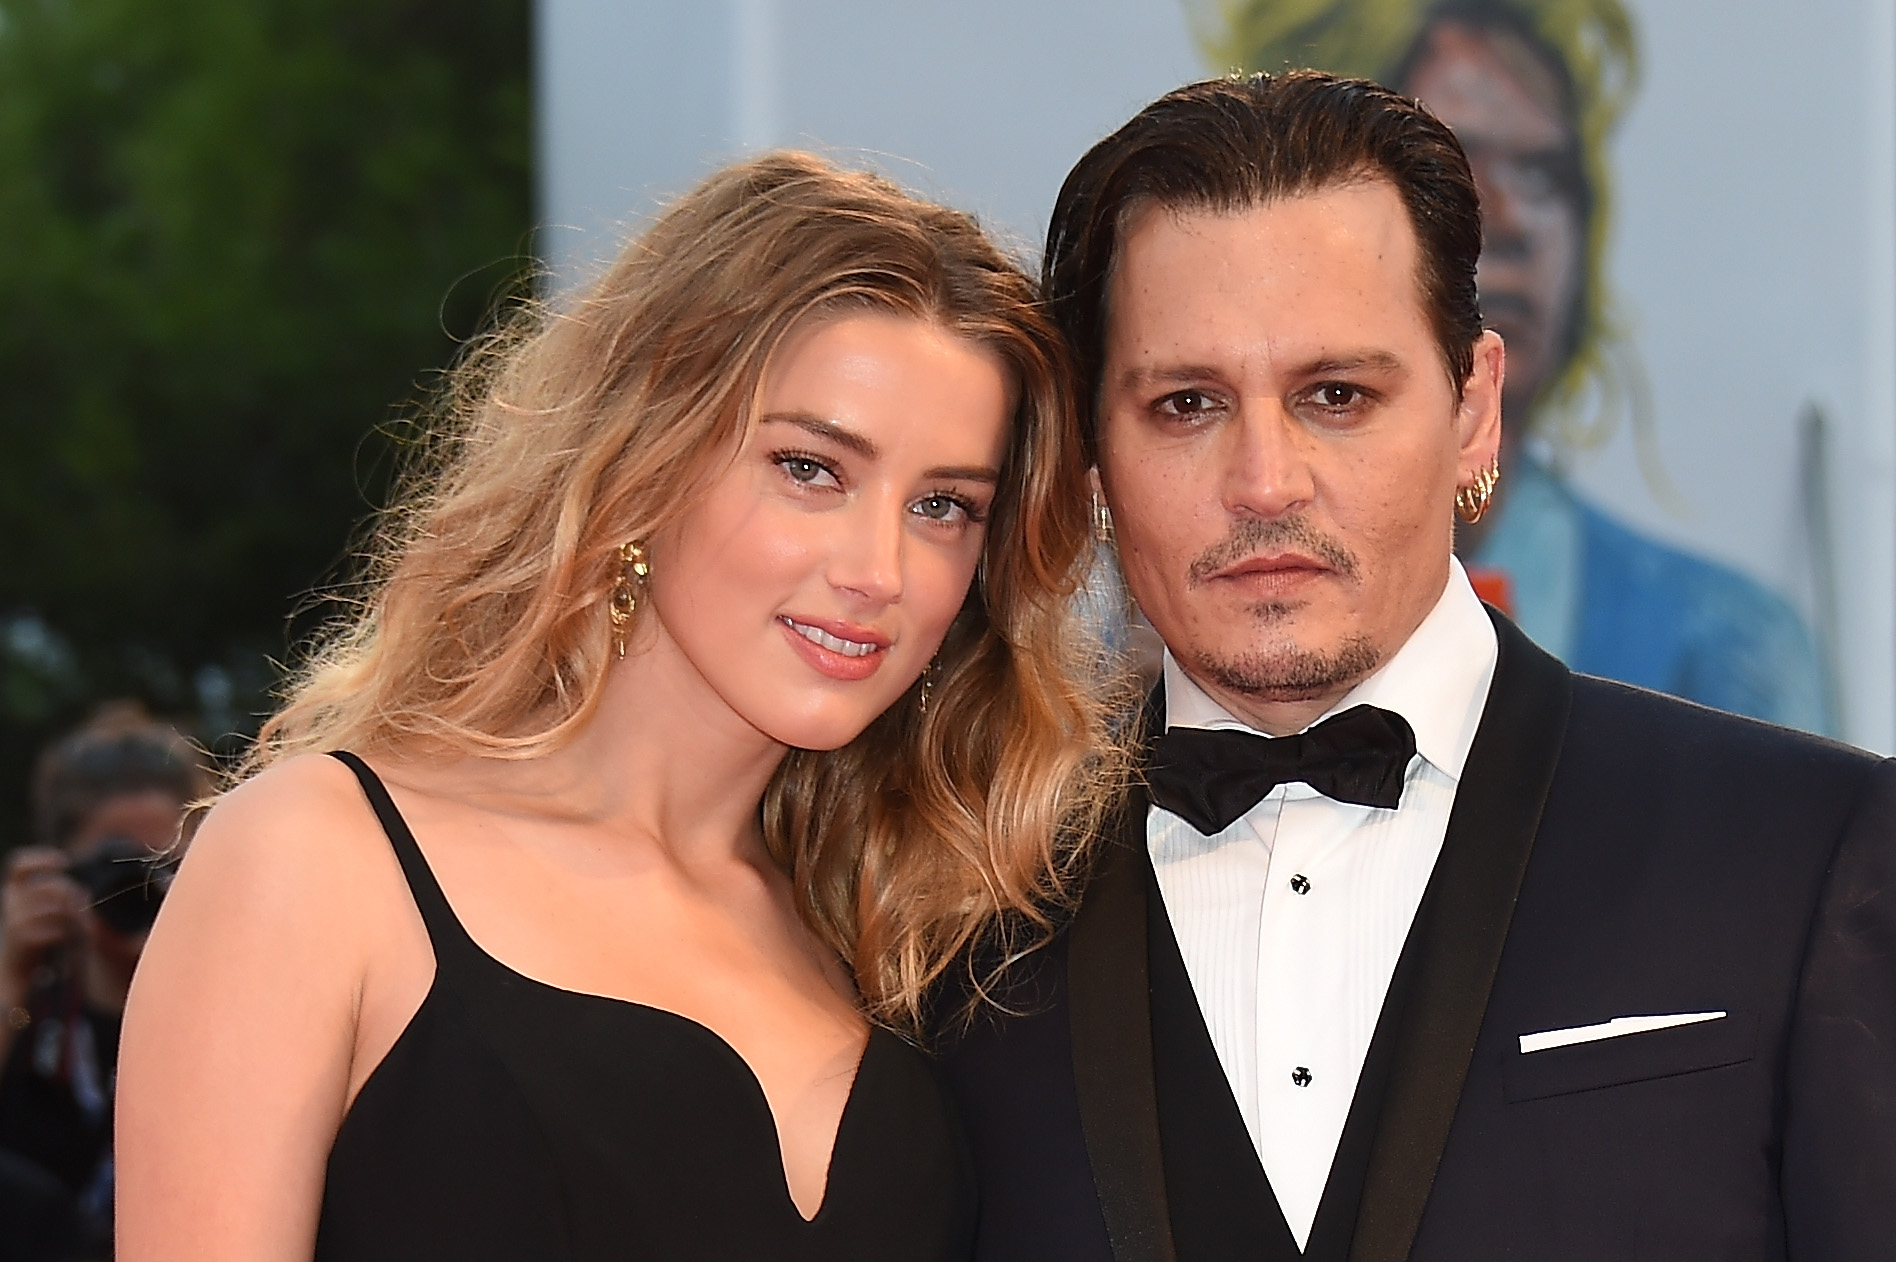 Johnny Depp and Amber Heard in Venice, Italy in 2015 | Source: Getty Images